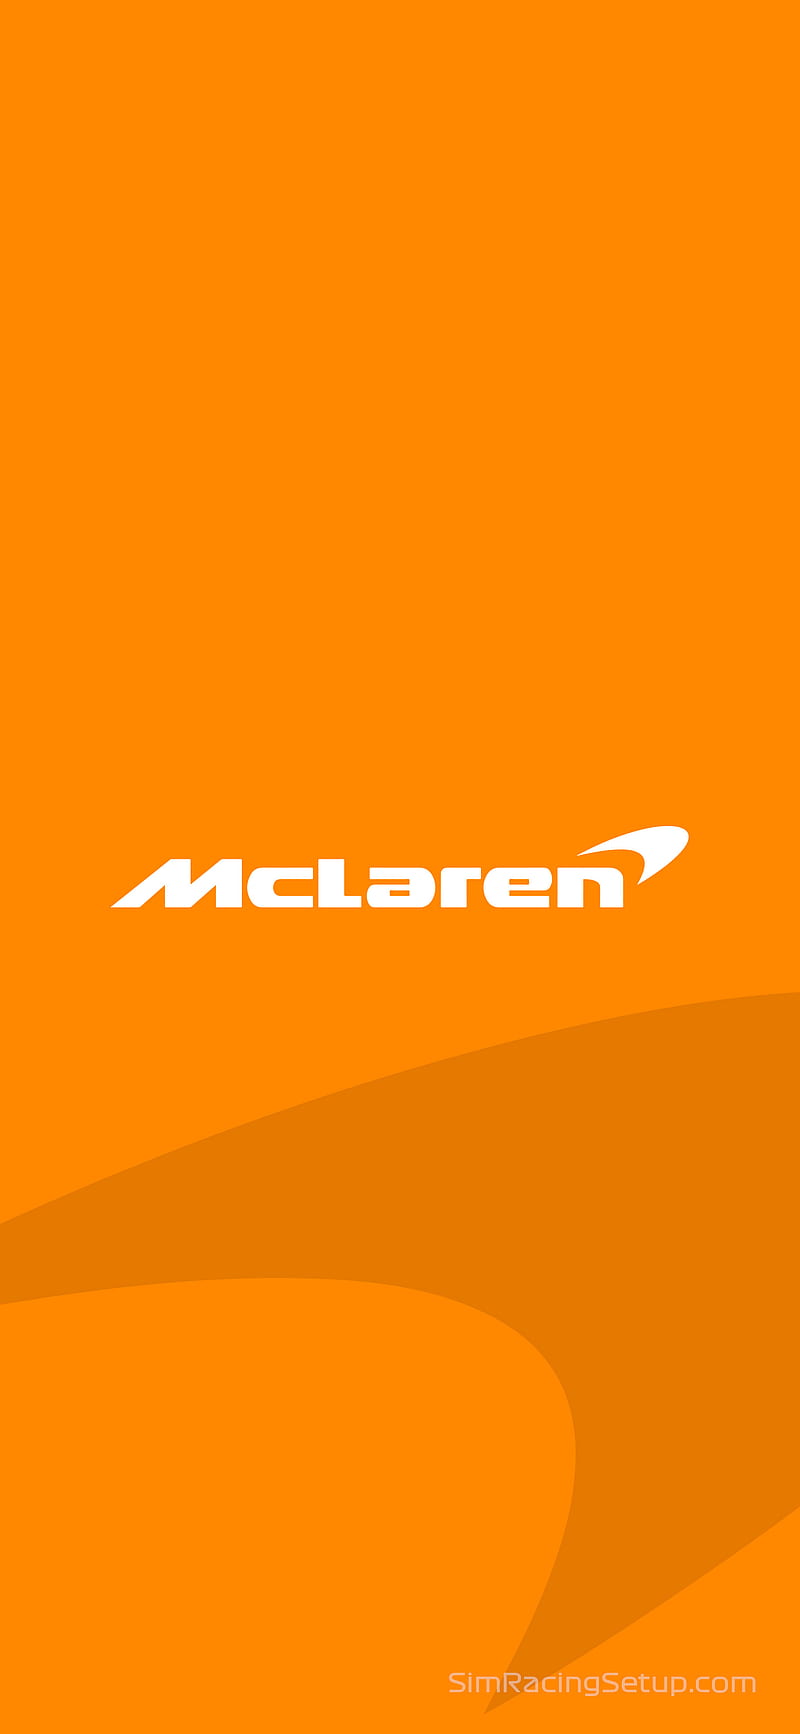 Ever Wondered What McLaren's Logo Stands For?